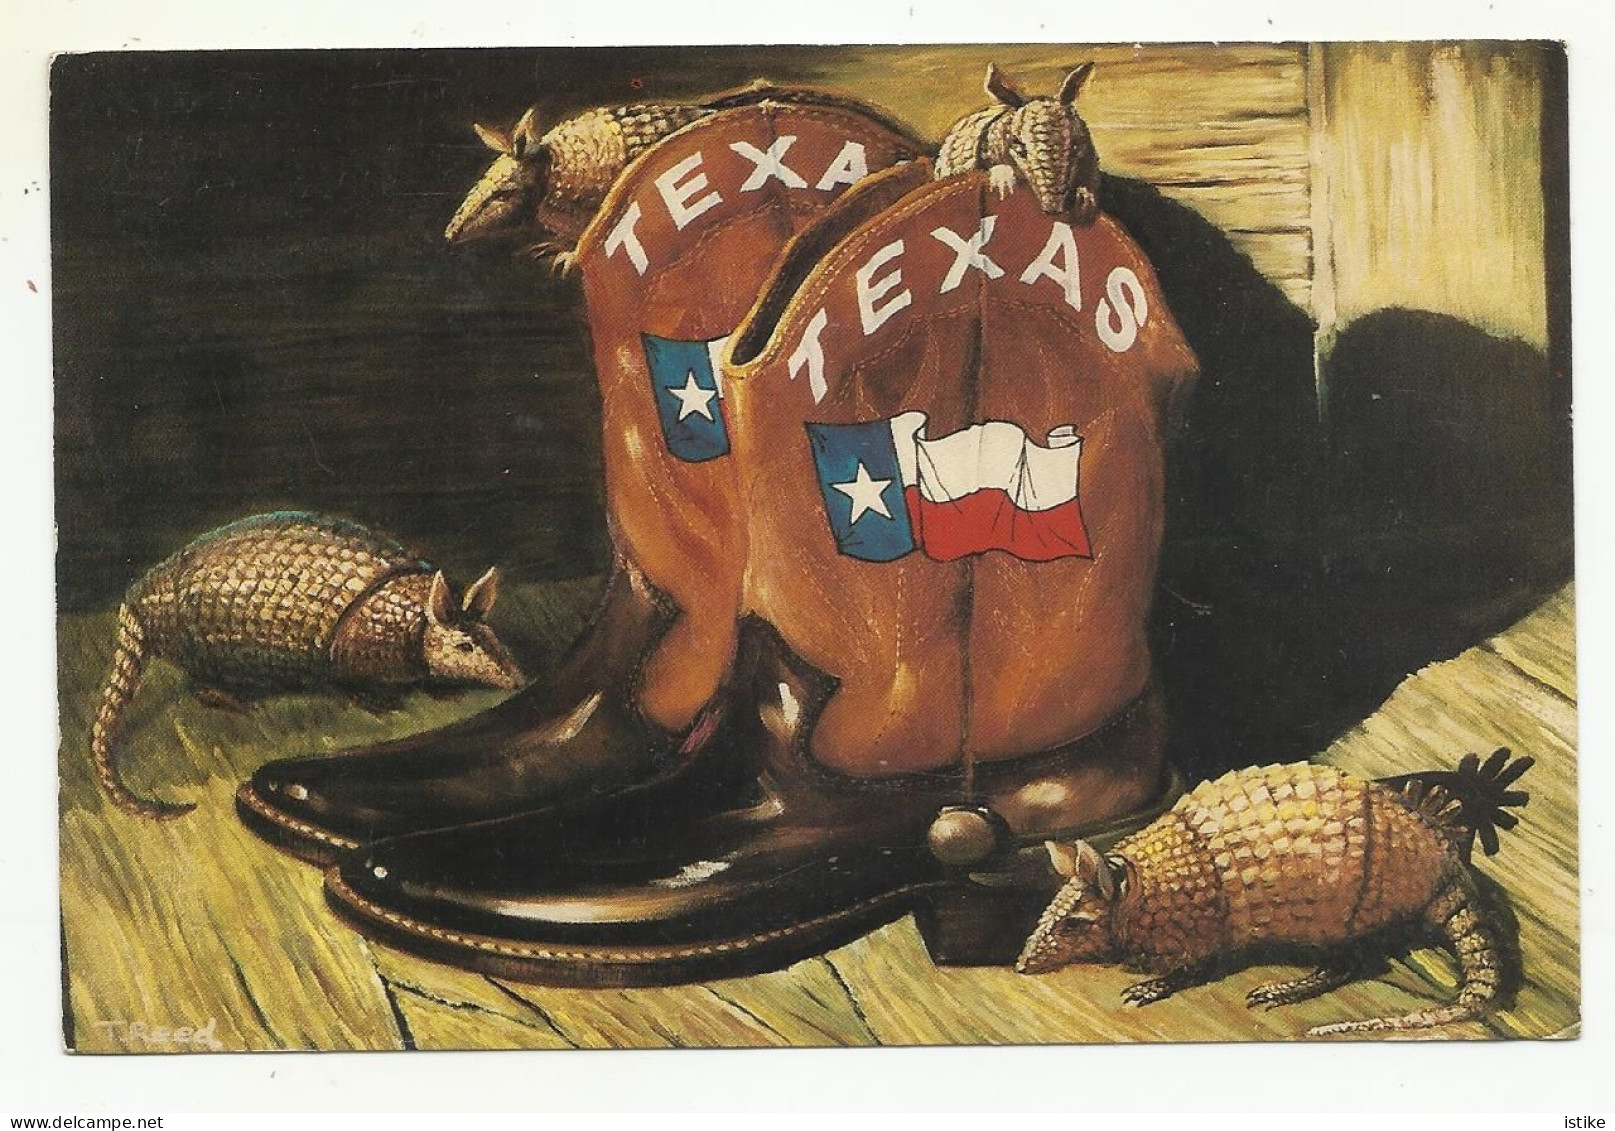 United States, Texas, Cowboy Boots With Armadillos, 1987. - Mode